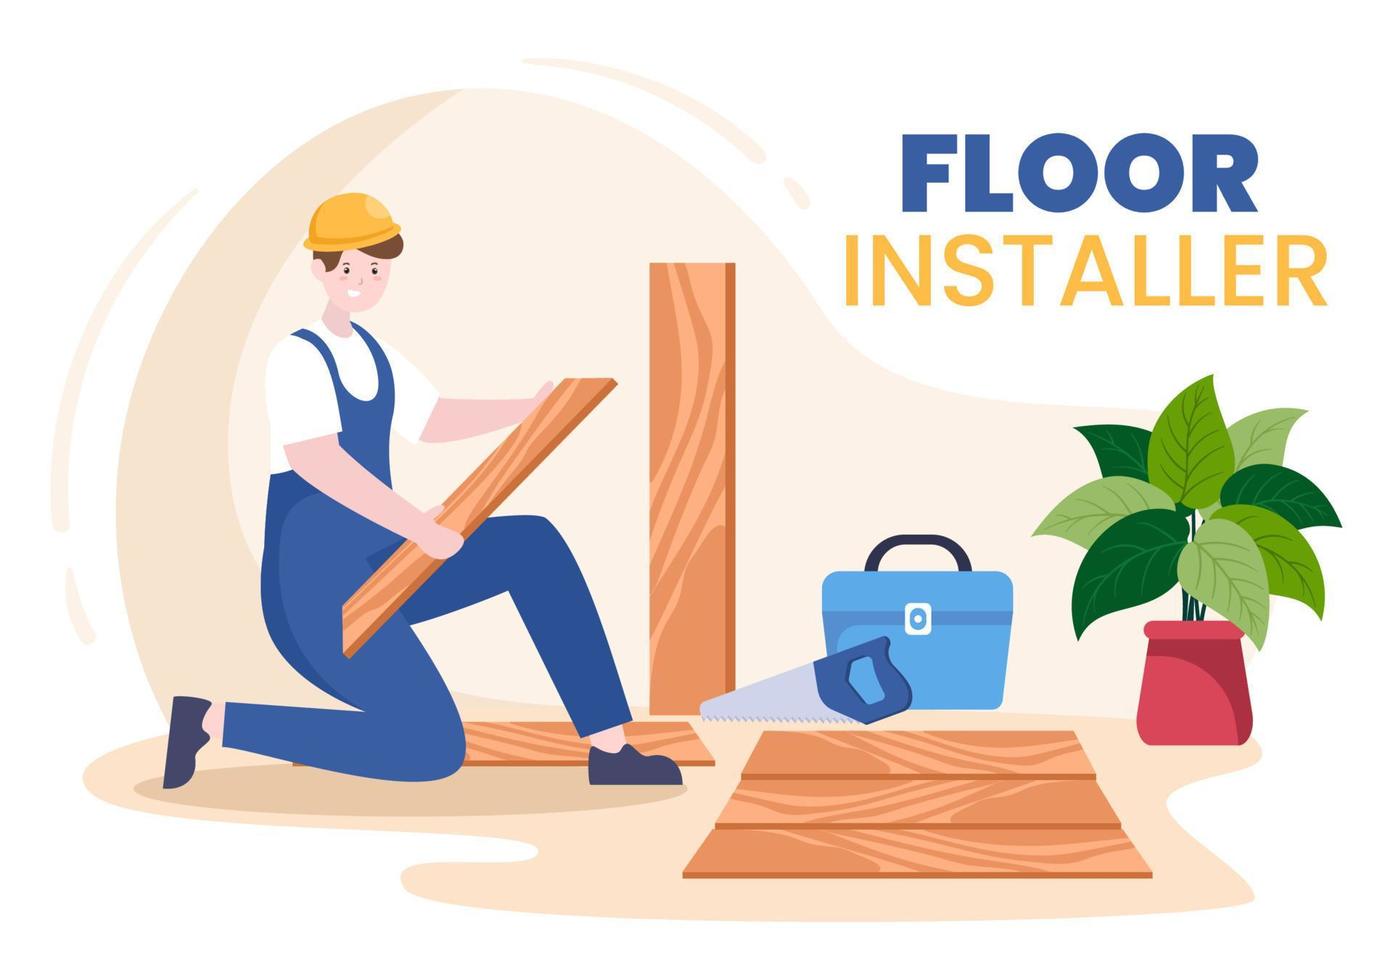 Floor Installation Cartoon Illustration with Repairman, Laying Professional Parquet, Wood or tile Floors in House Flooring Renovation Design vector